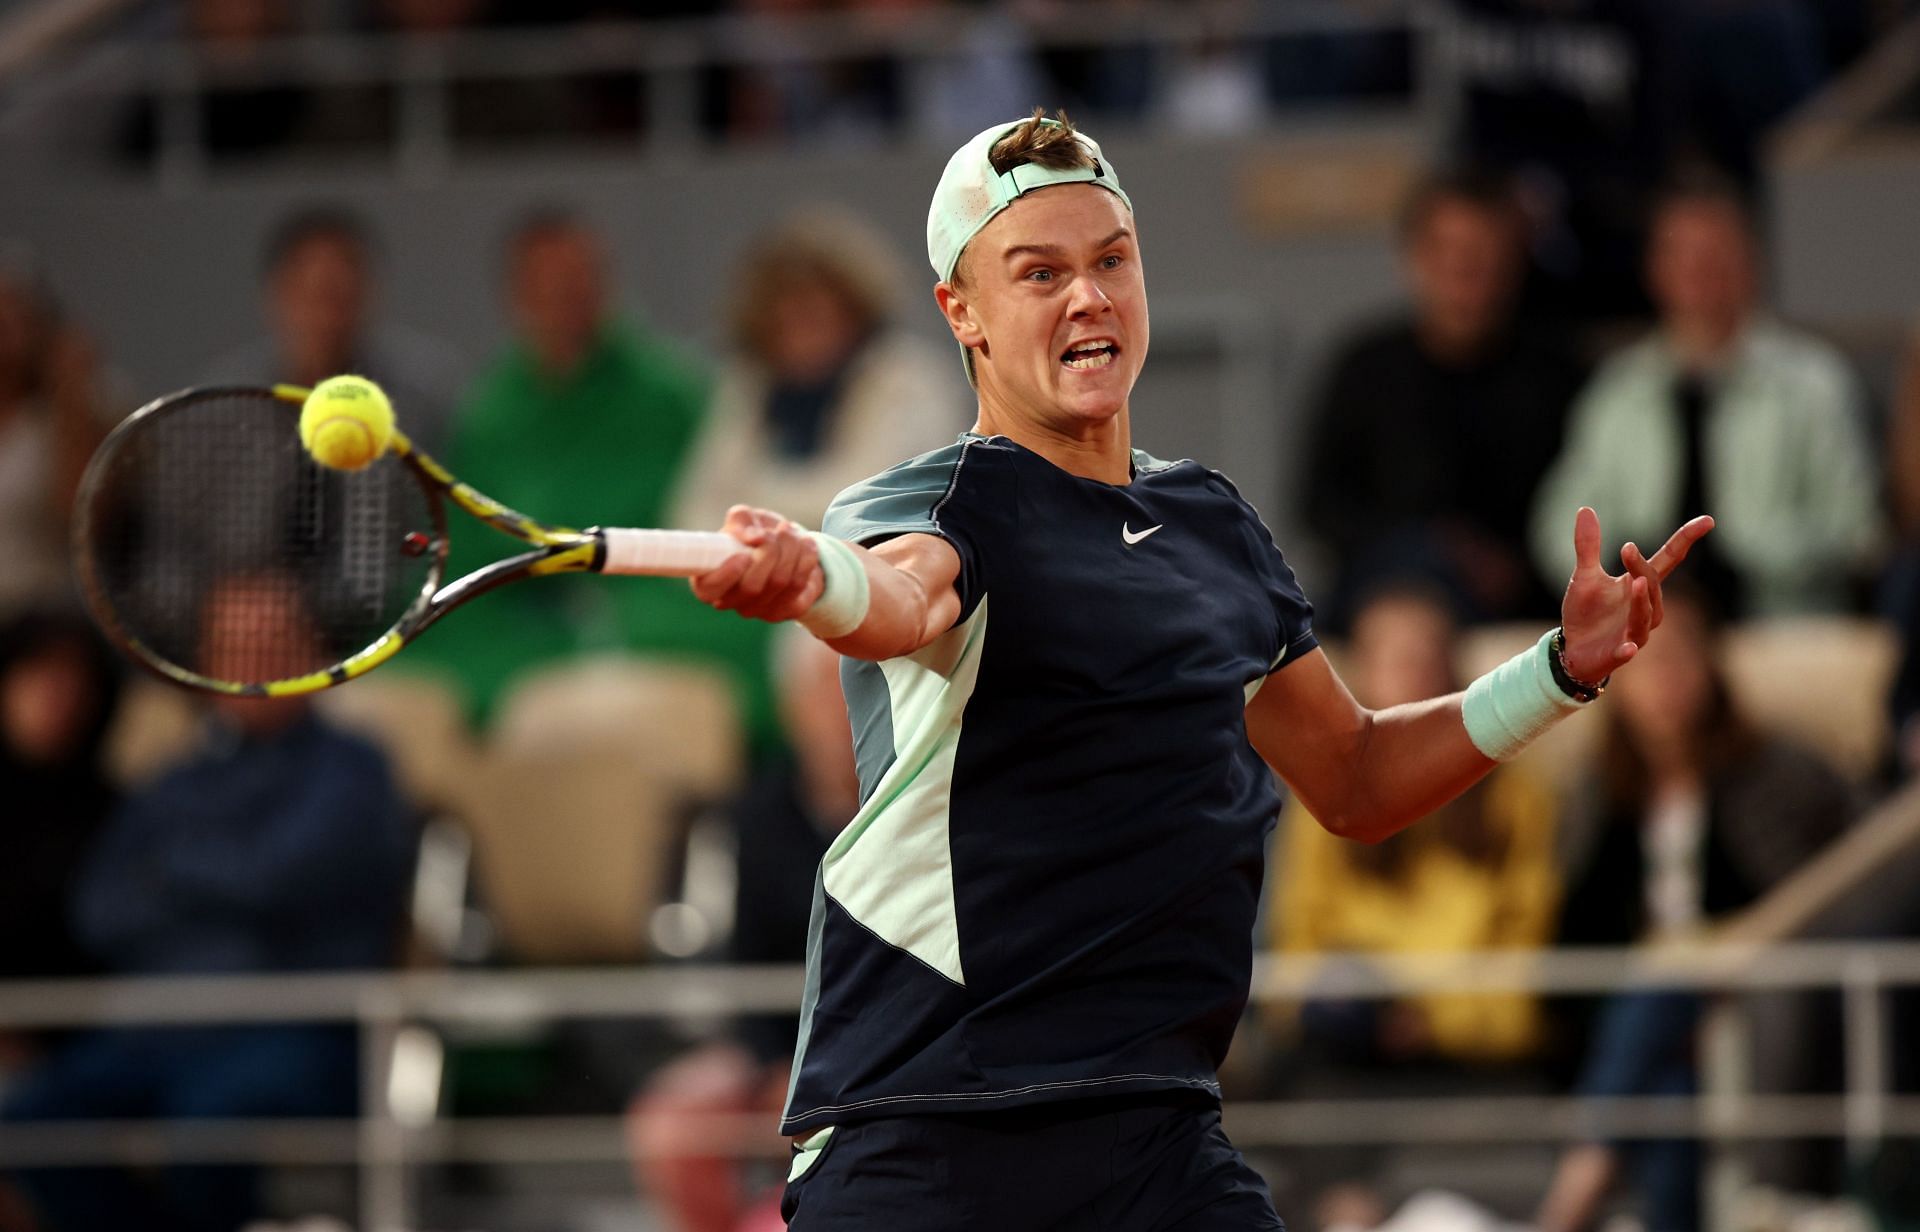 Holger Rune plays a forehand at the French Open